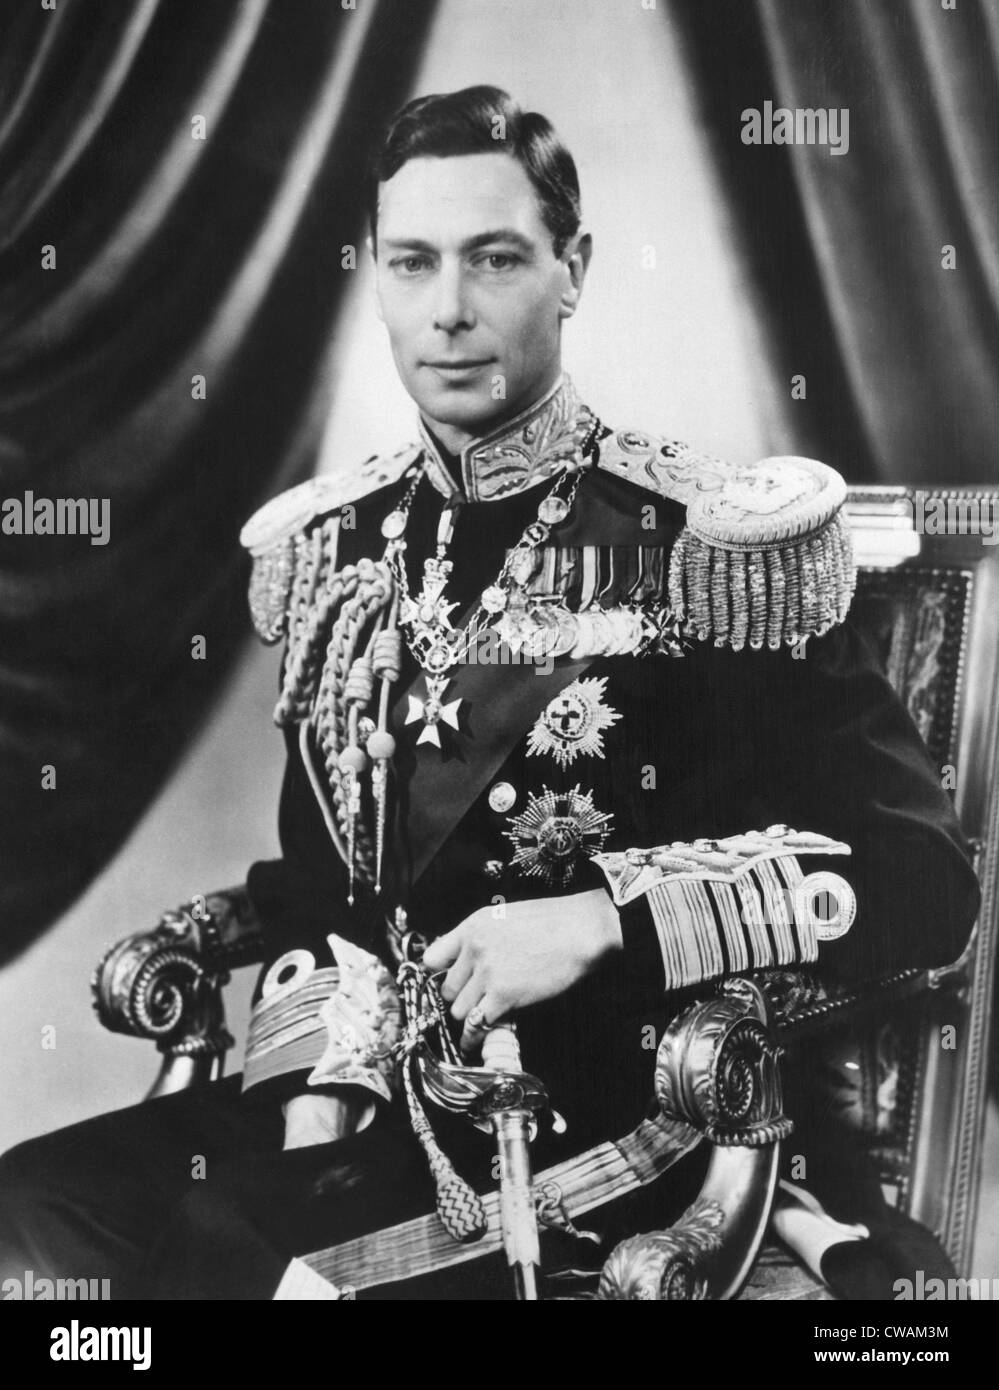 King George VI (1895-1952), King of the United Kingdom, May 3, 1937.. Courtesy: CSU Archives / Everett Collection Stock Photo